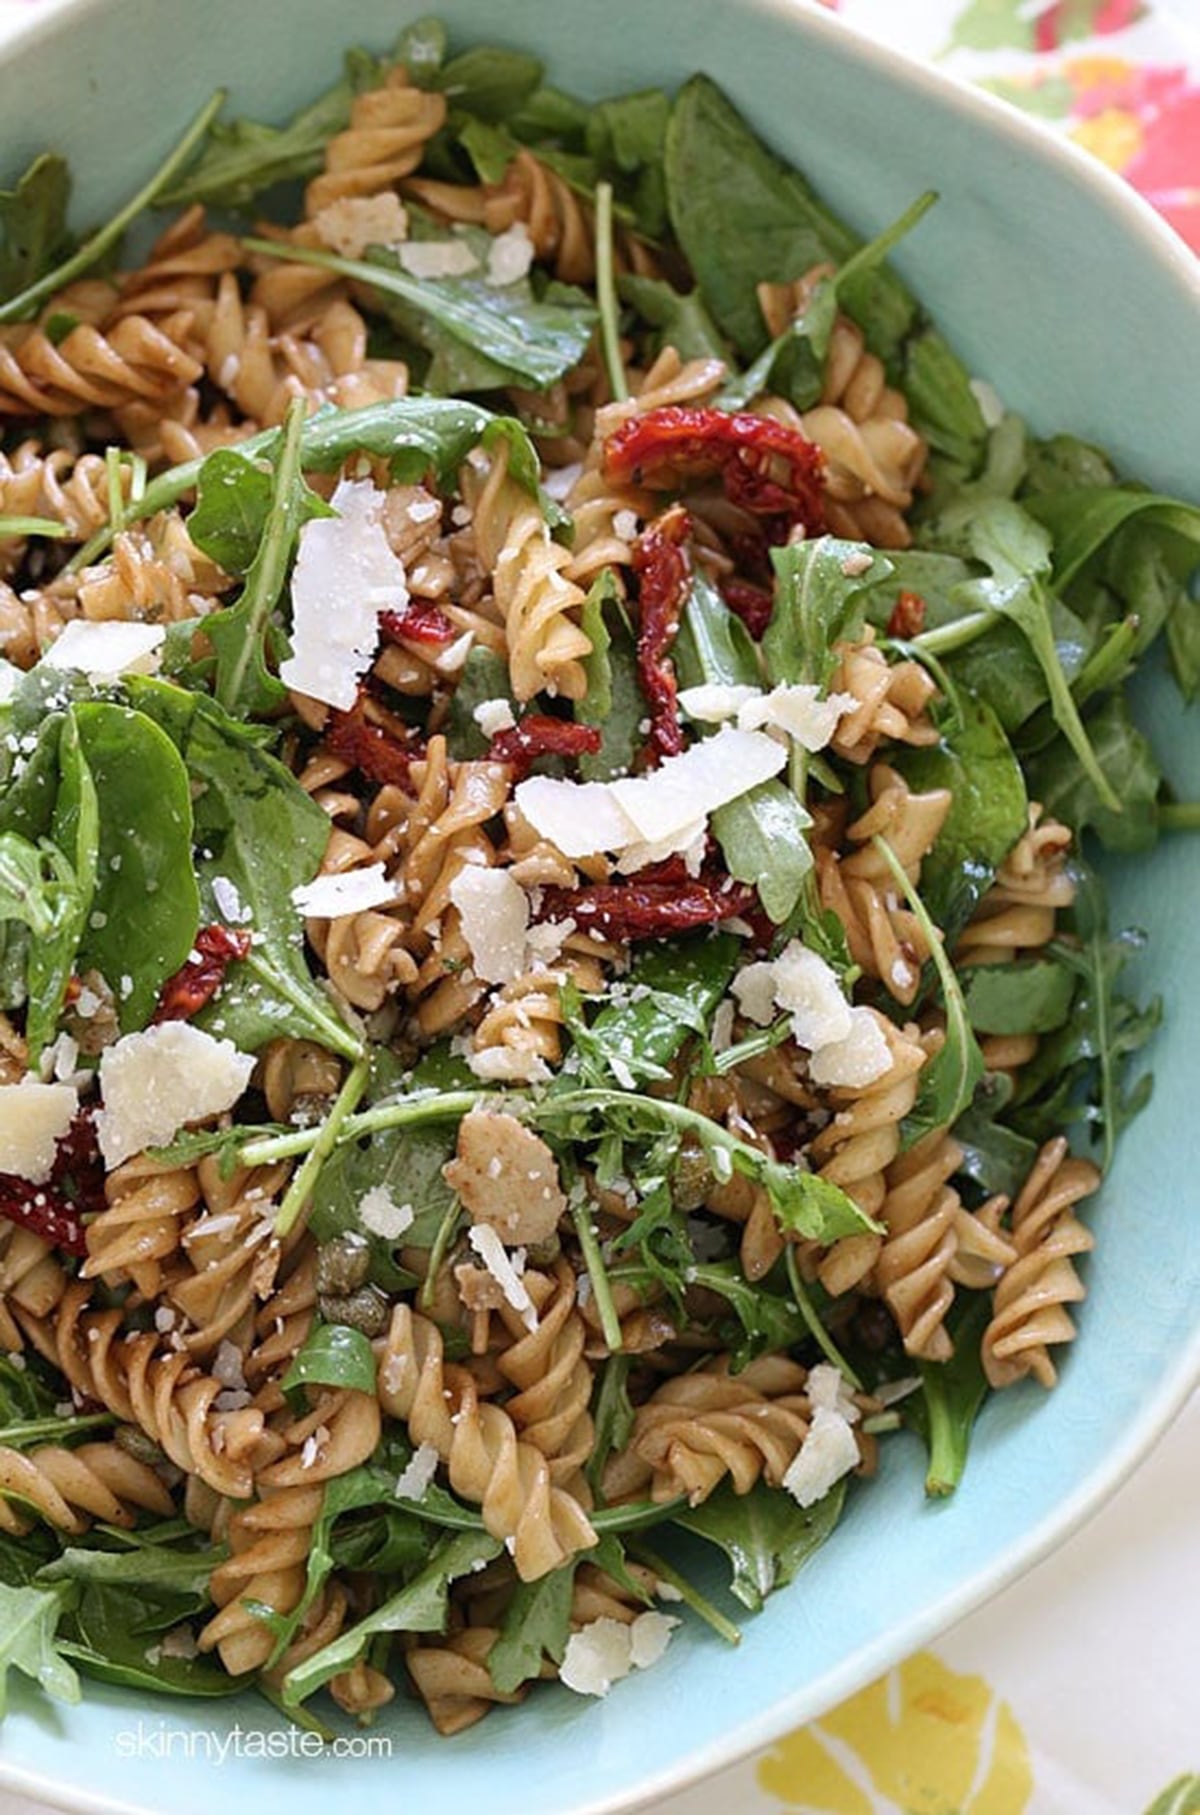 Summer Pasta Salad with Baby Greens